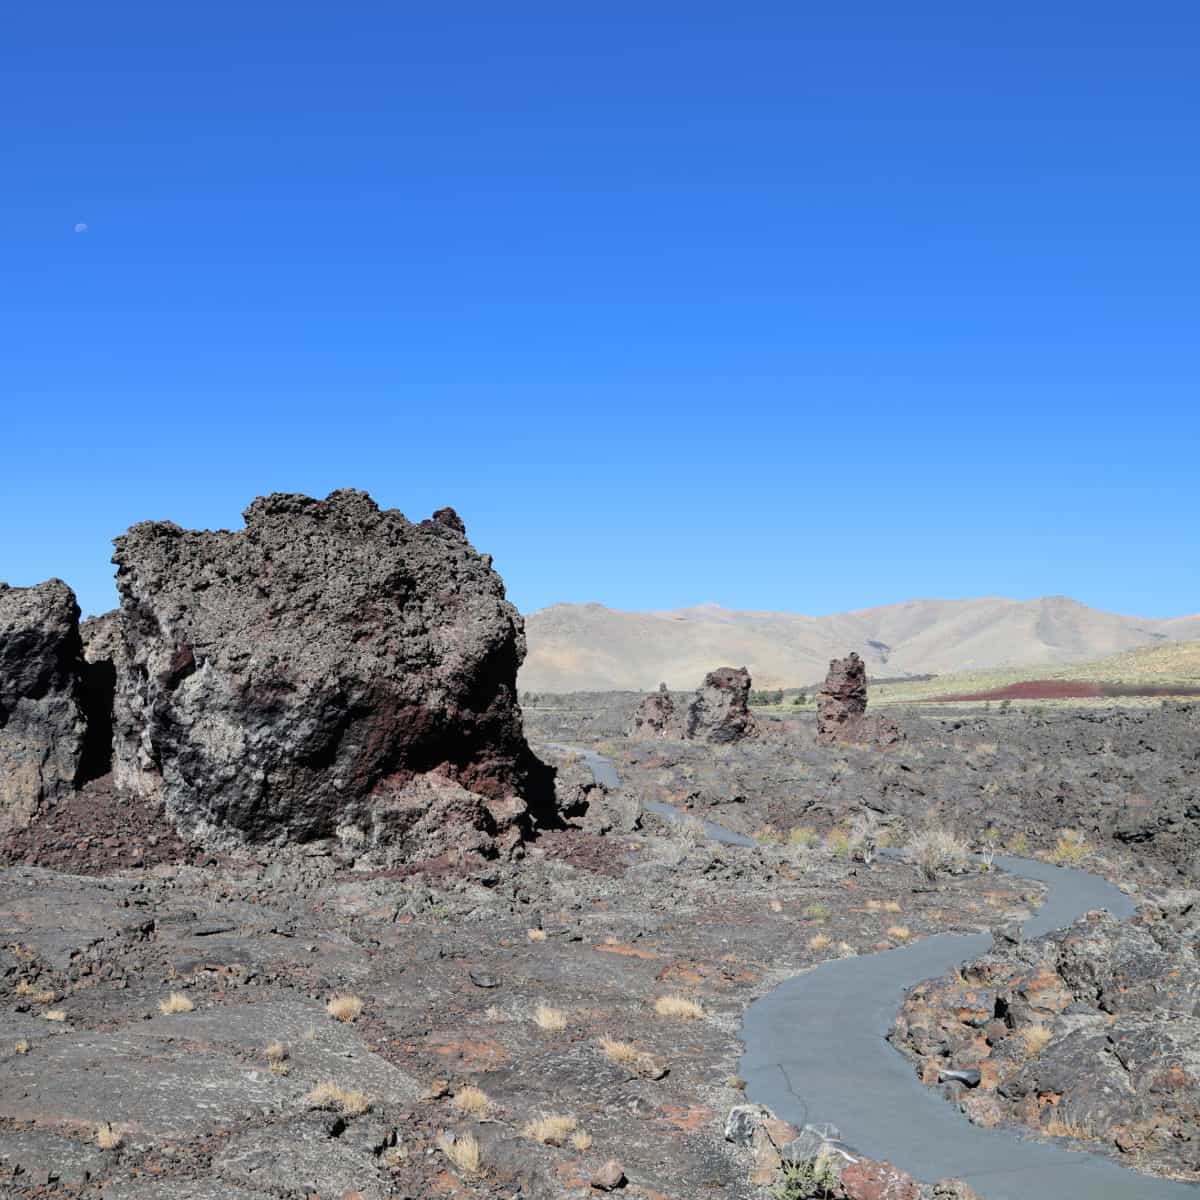 Hiking in Craters of the Moon National Monument